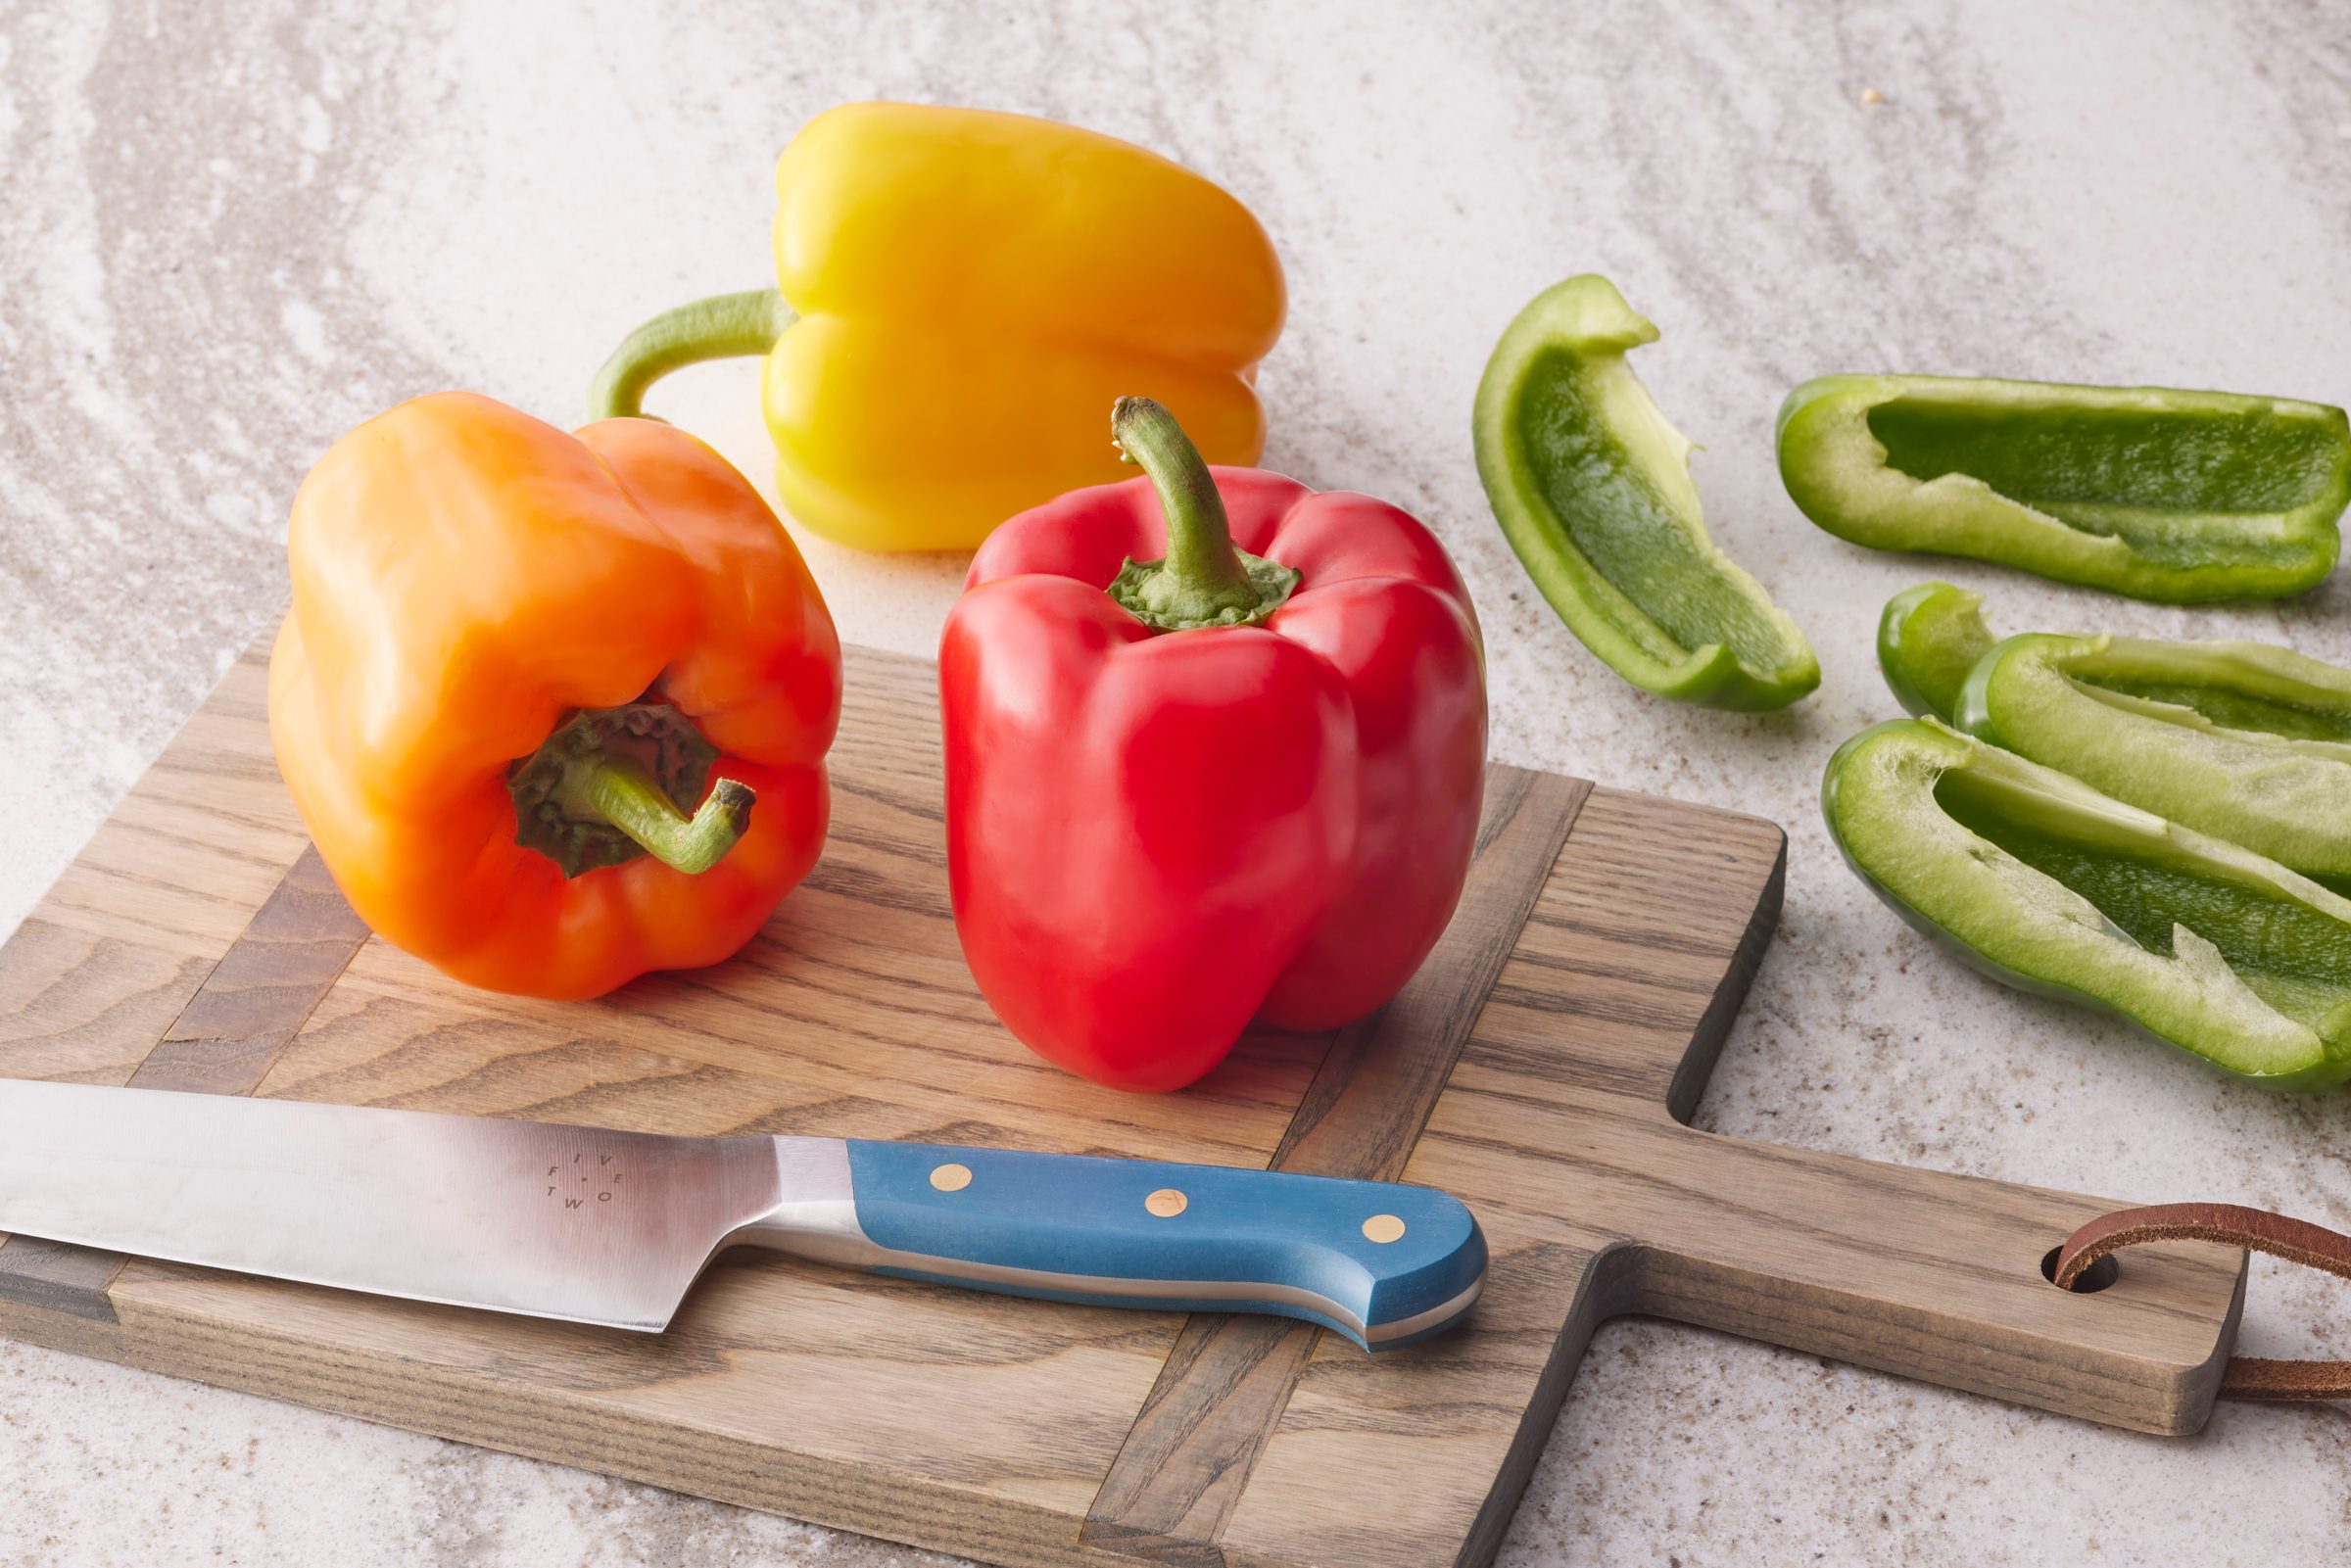 How to Cut a Bell Pepper {Step-by-Step Tutorial} - FeelGoodFoodie